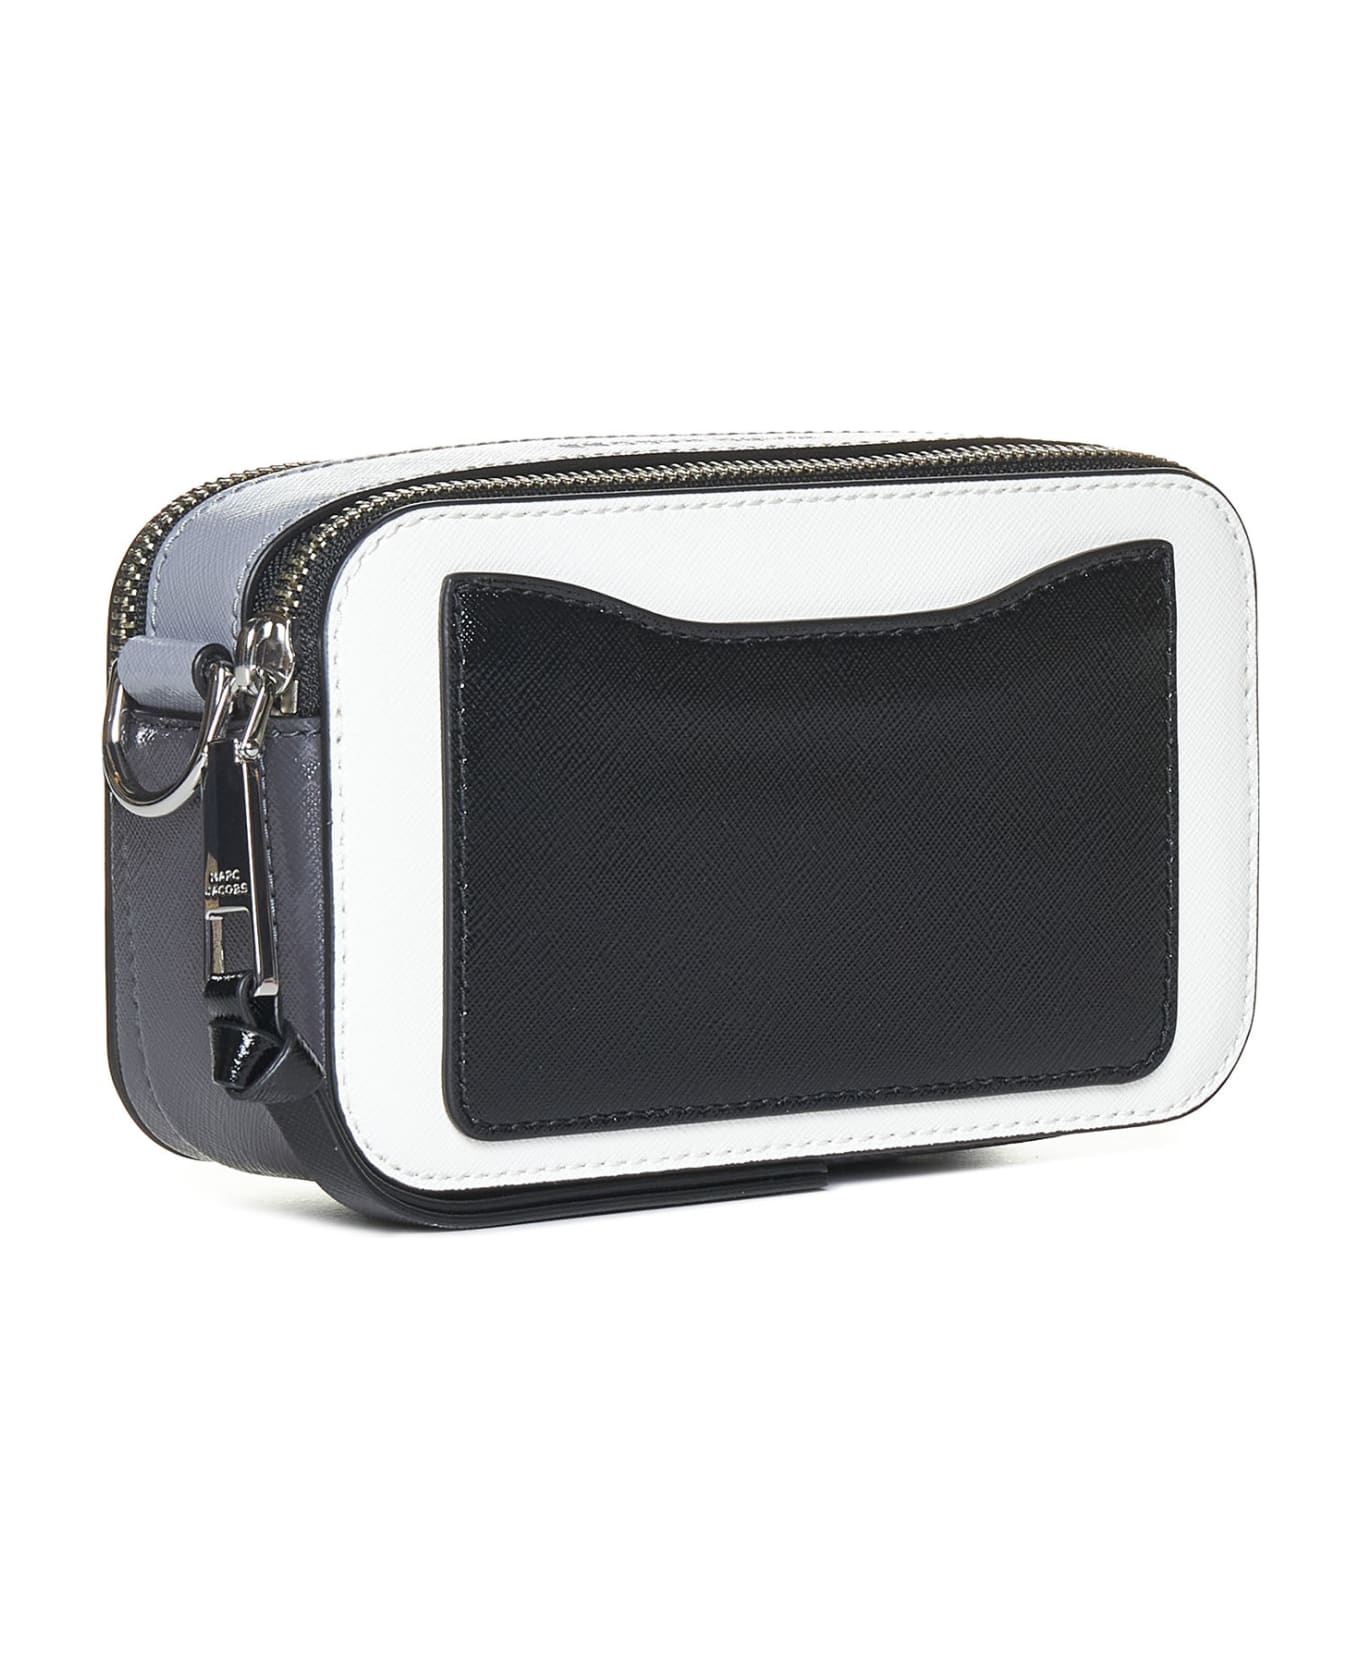 Marc Jacobs Multicolor Leather Snapshot Crossbody Bag - White